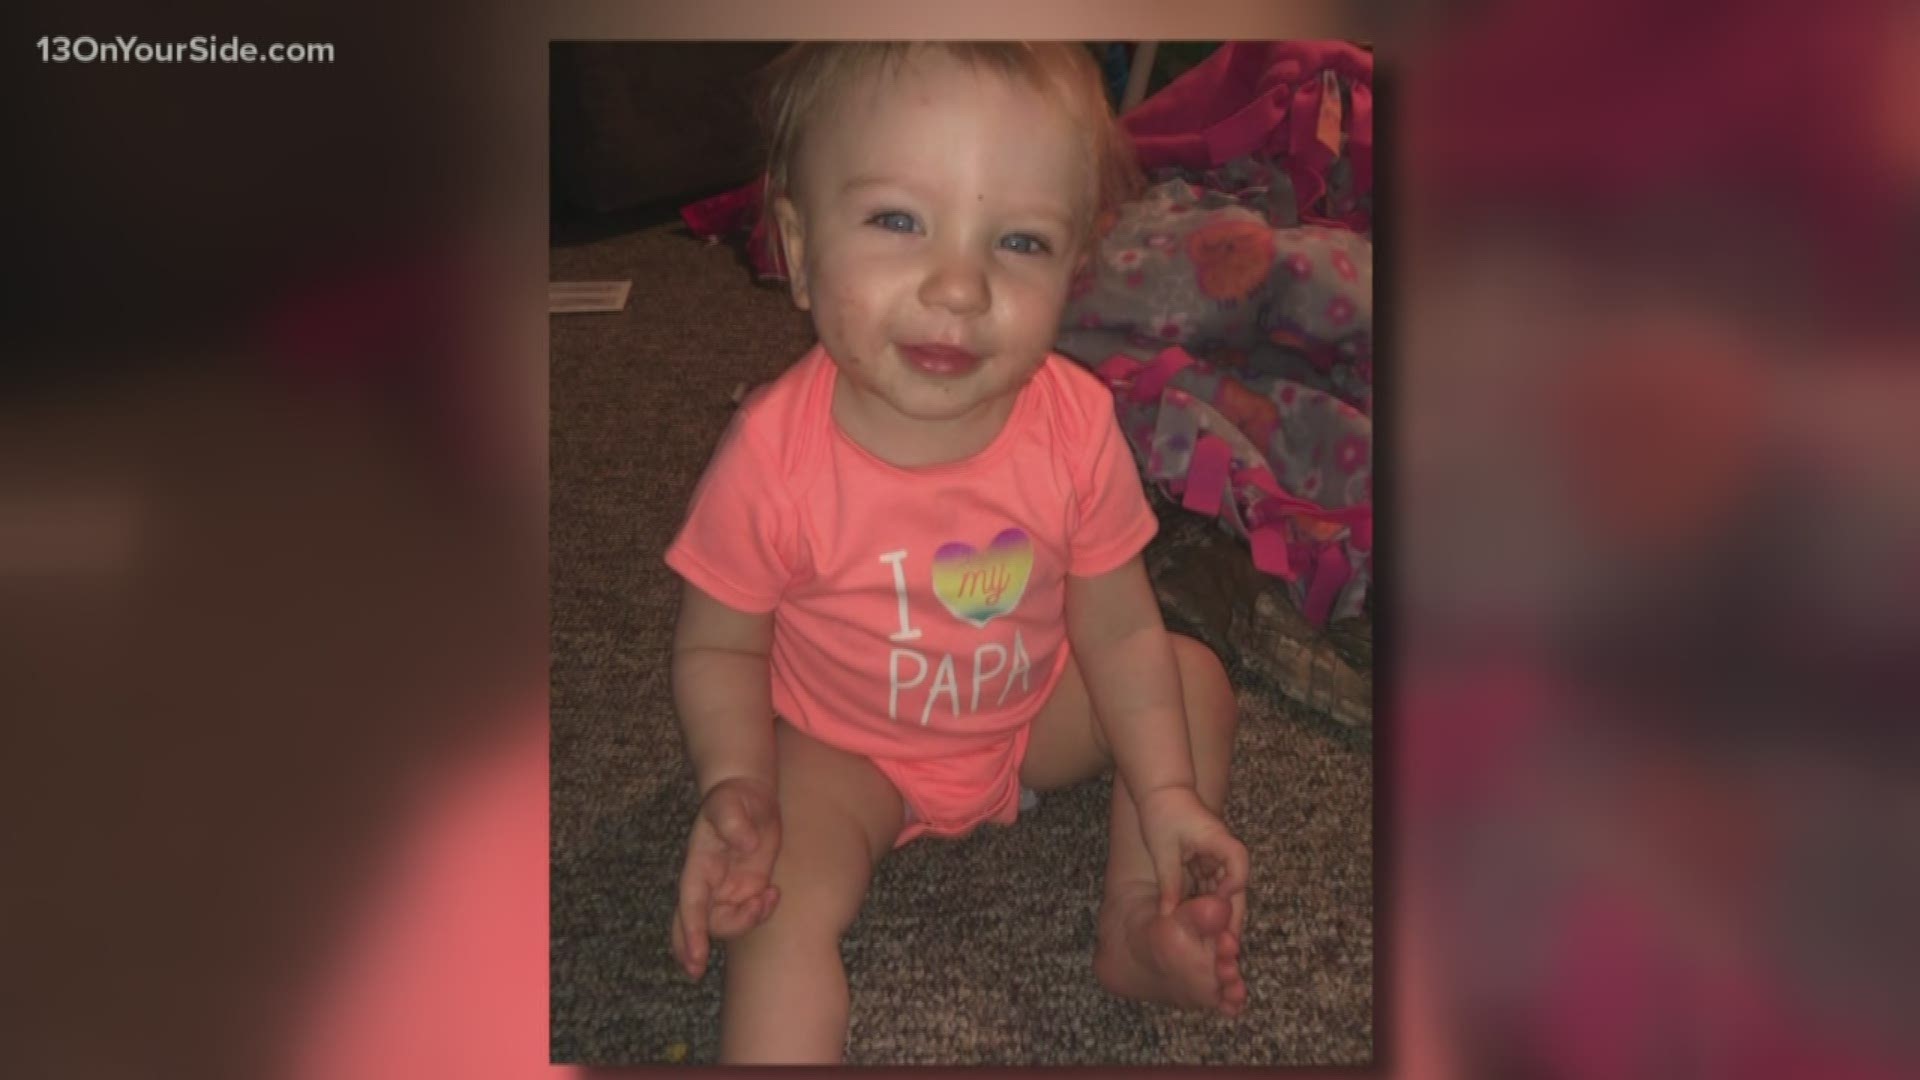 Michigan State Police are investigating the death of a 1-year-old girl who was found unresponsive in a Montcalm County home.